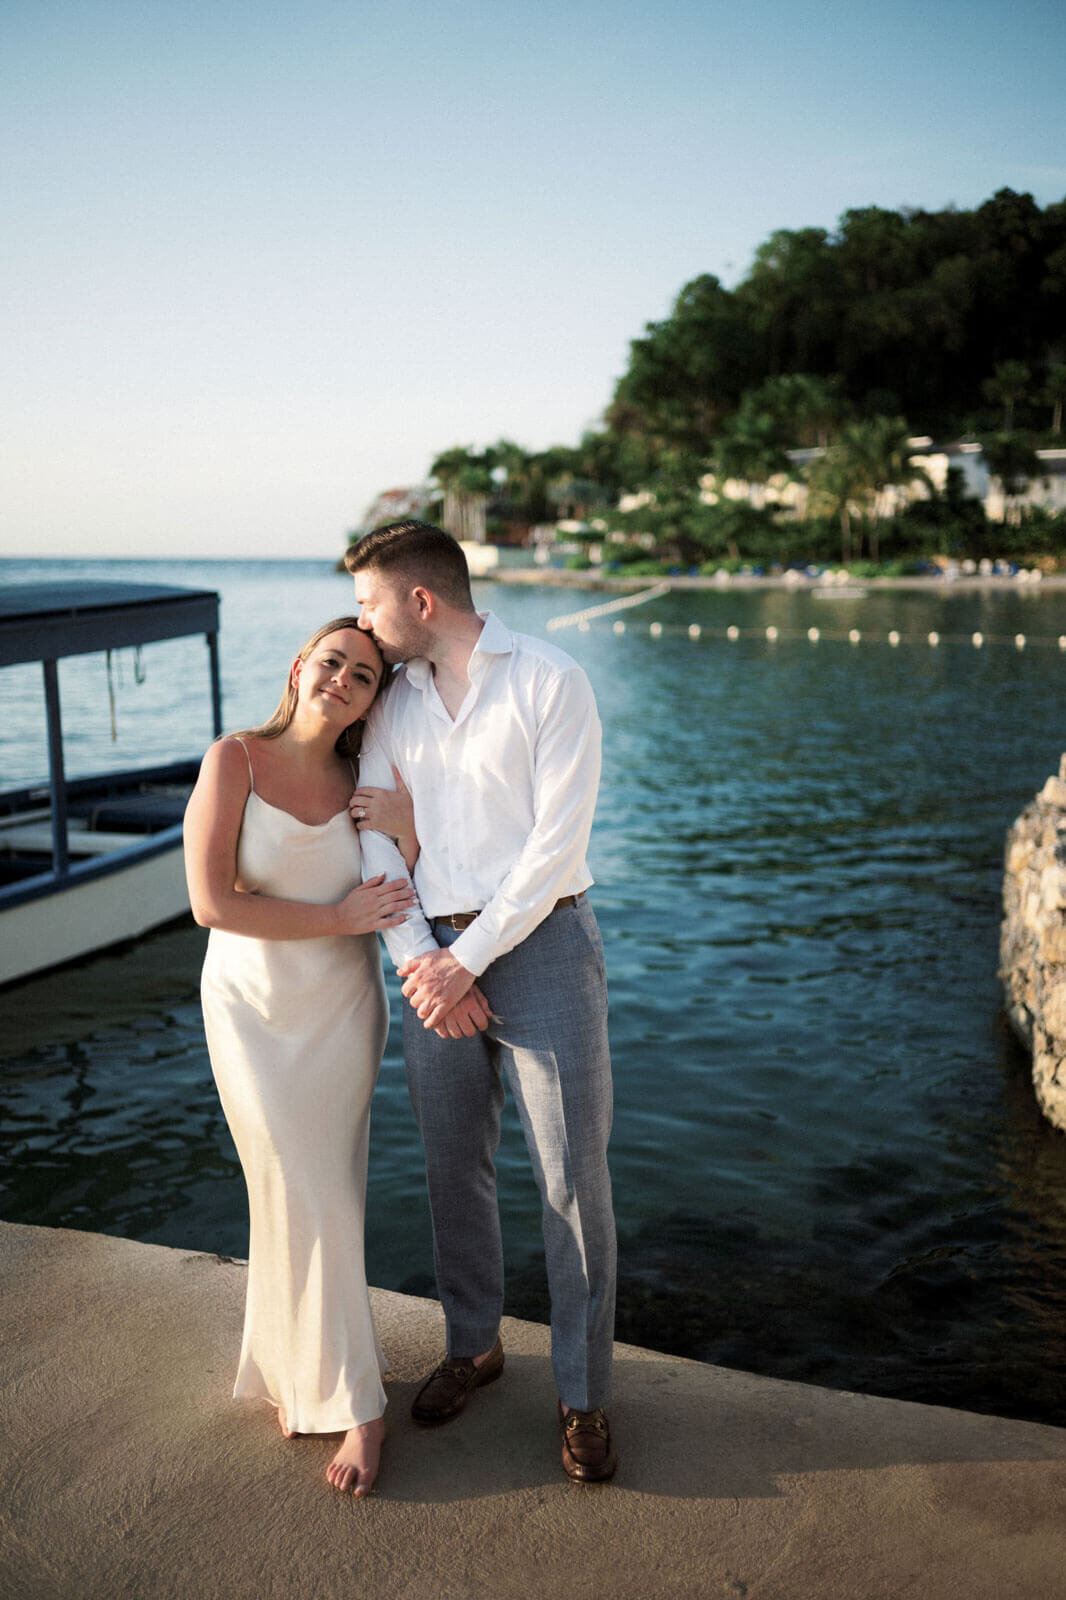 The engaged couple is standing on a dock, while the man is kissing the woman's head, at Round Hill Hotel & Villas, Jamaica.